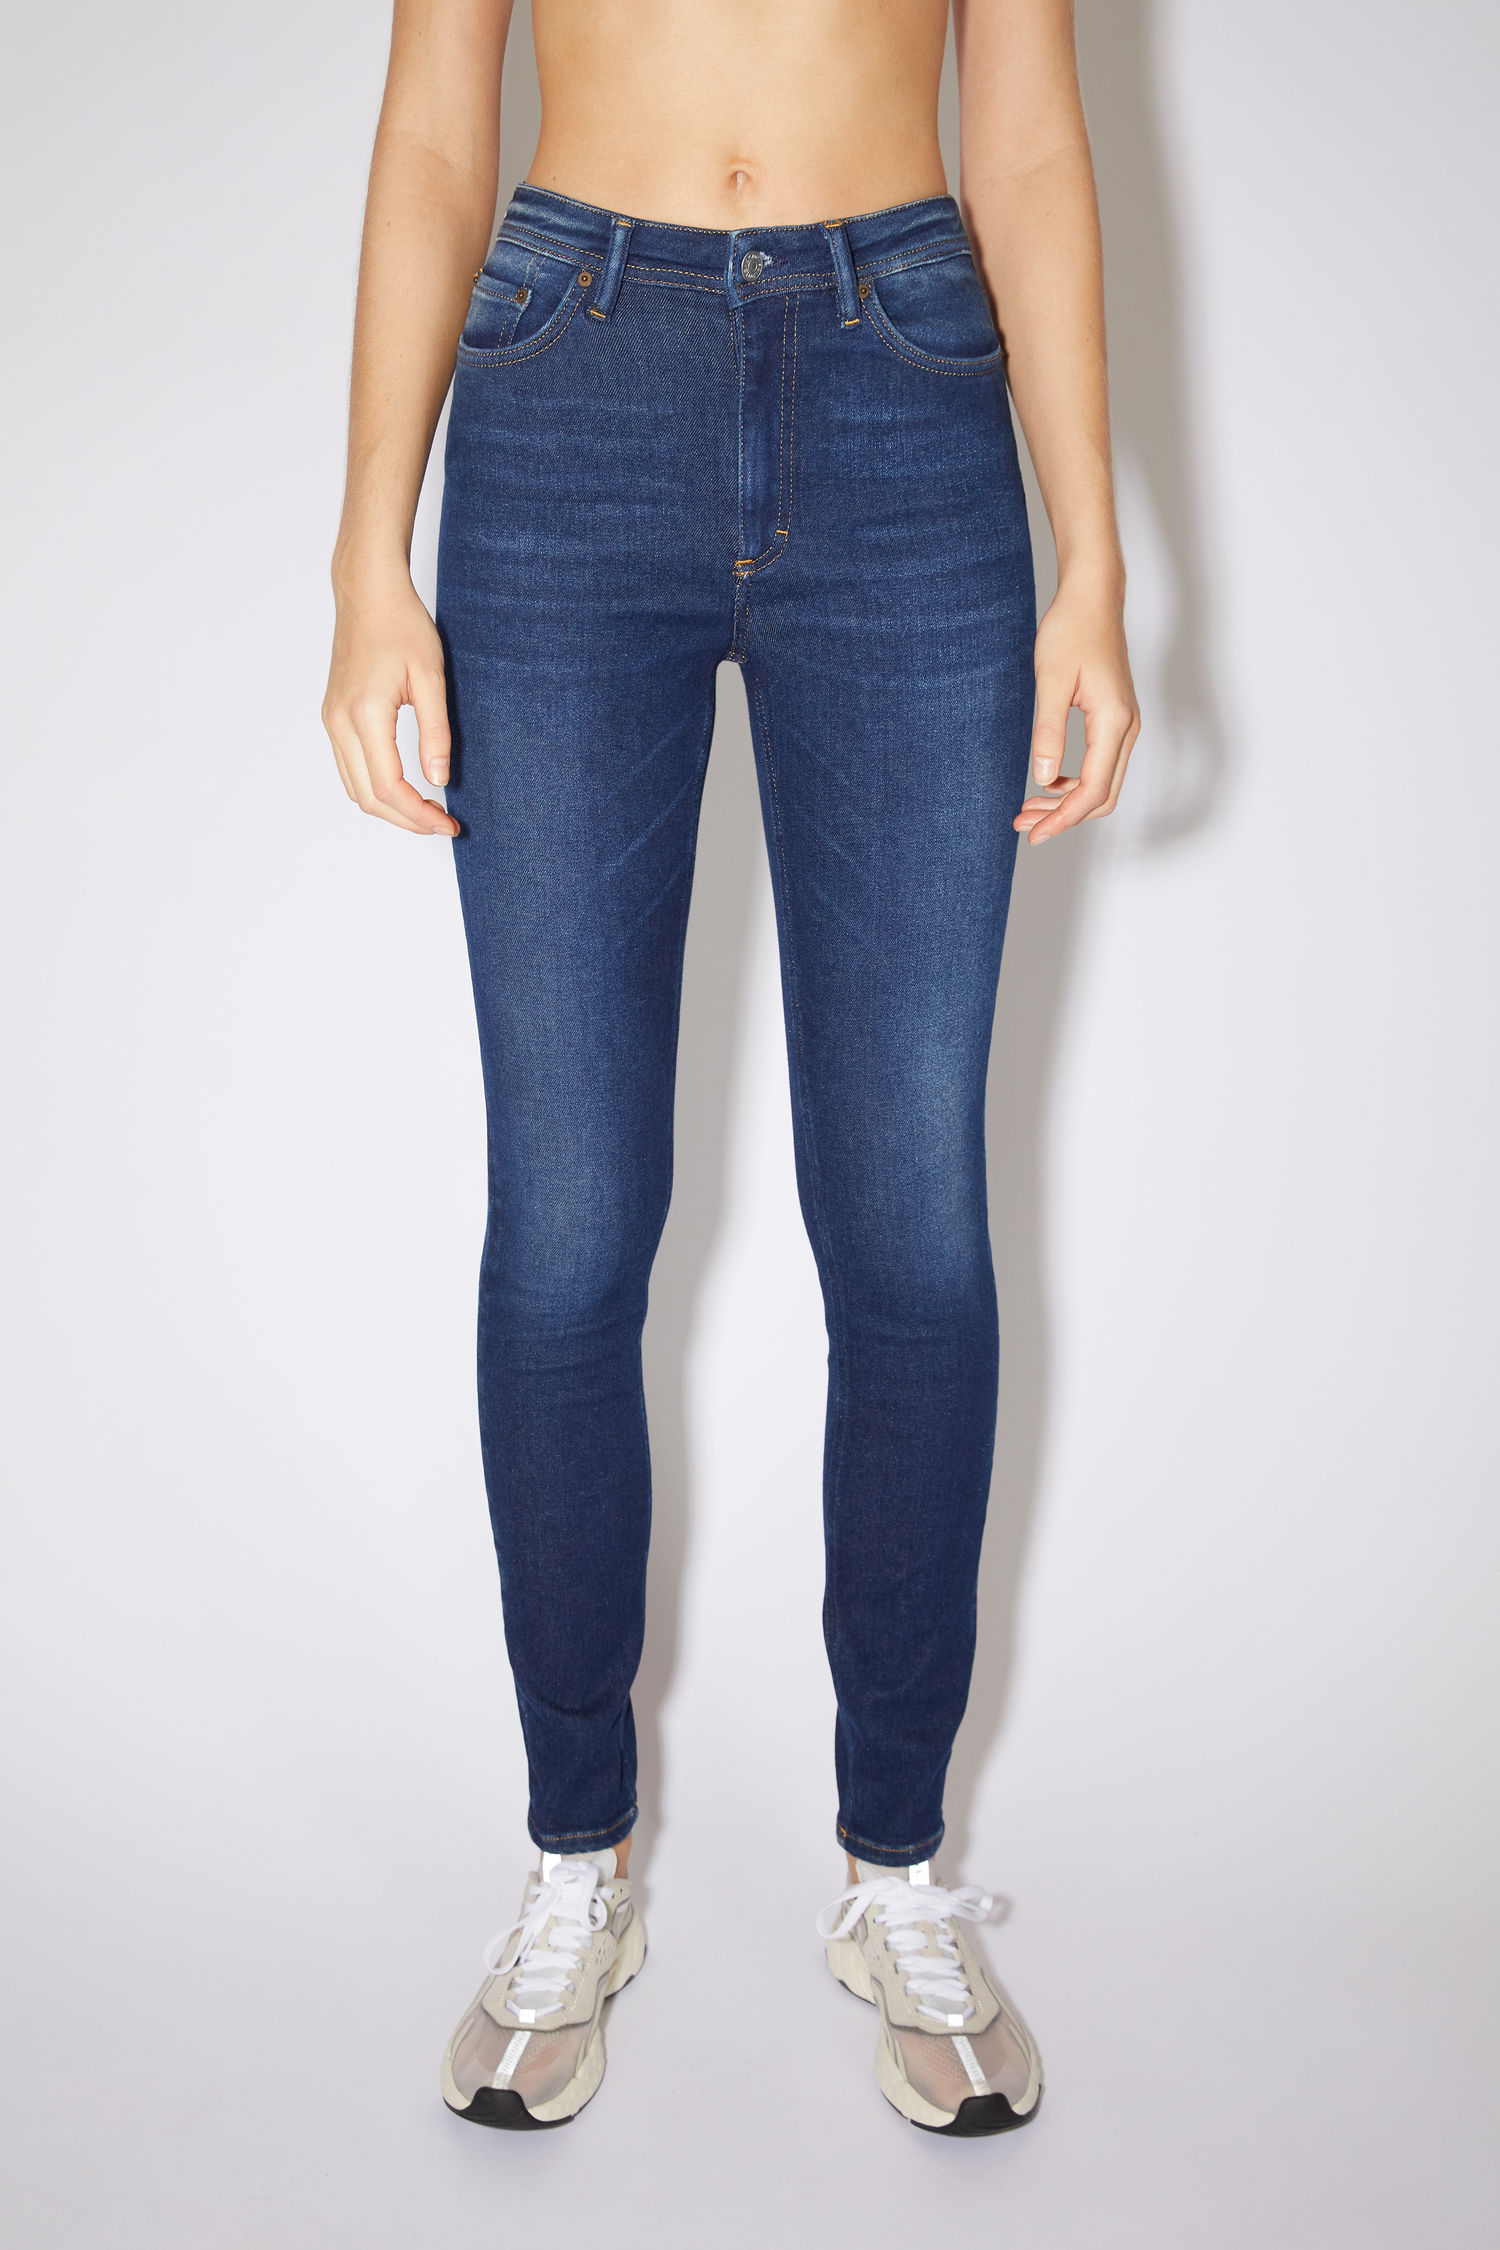 Skinny fit jeans